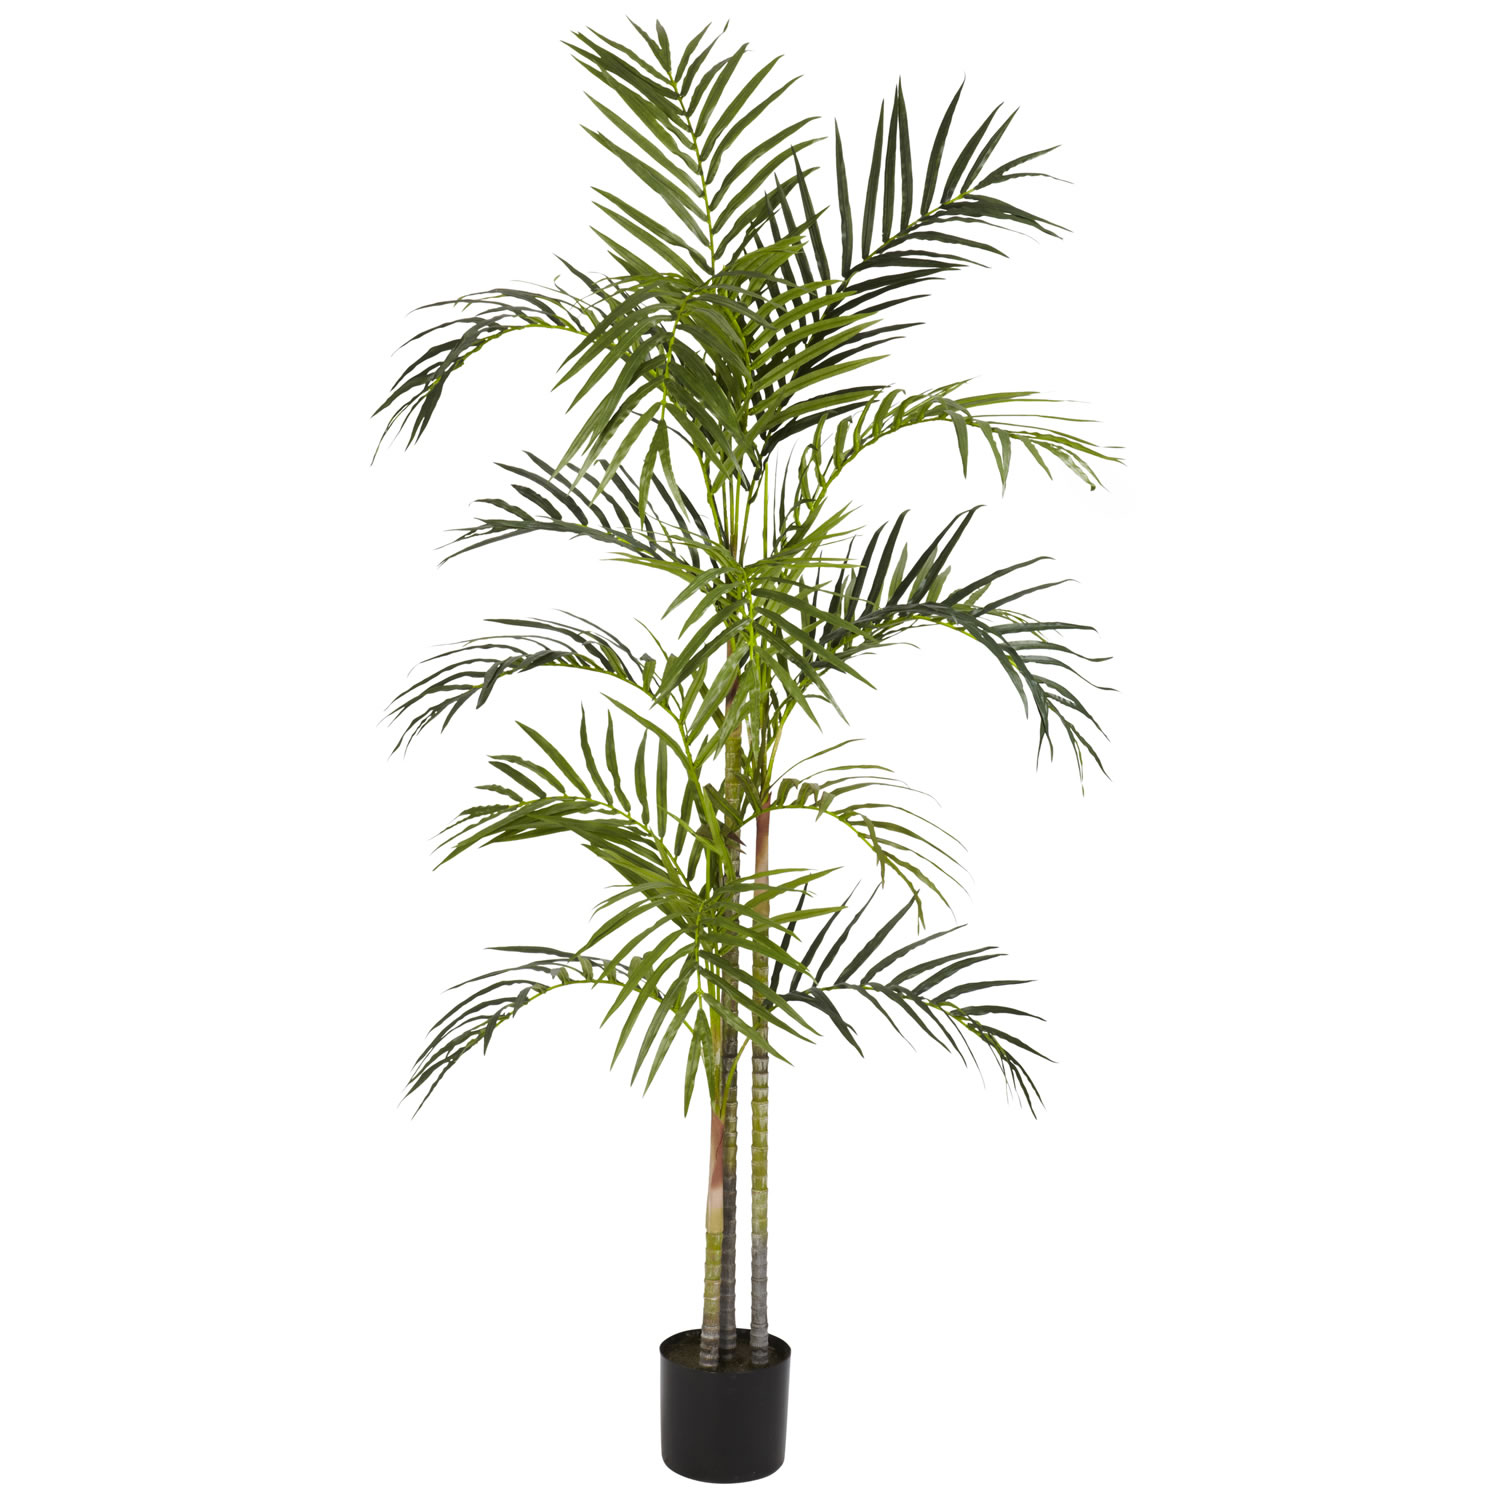 5 Foot Areca Palm Tree: Potted